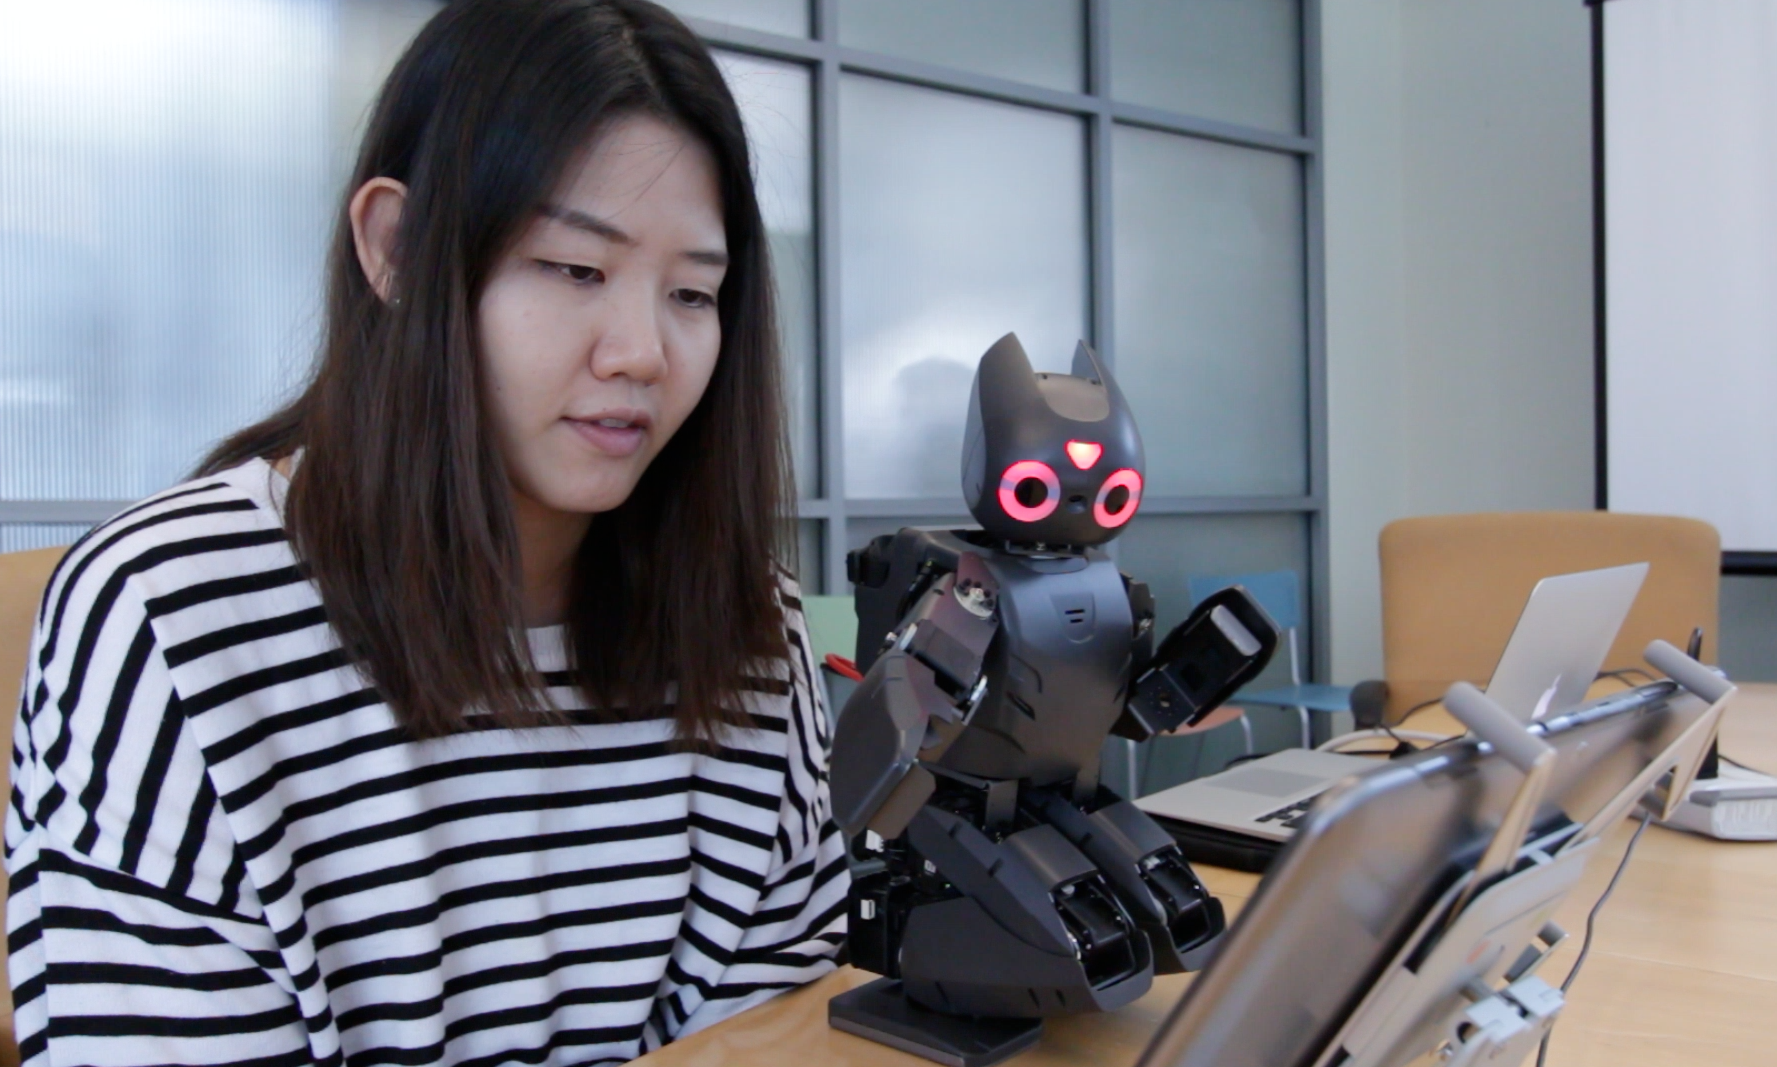 Hae Won Park, a postdoctoral fellow in the School of Electrical and Computing Engineering, teaches a robot how to play Angry Birds